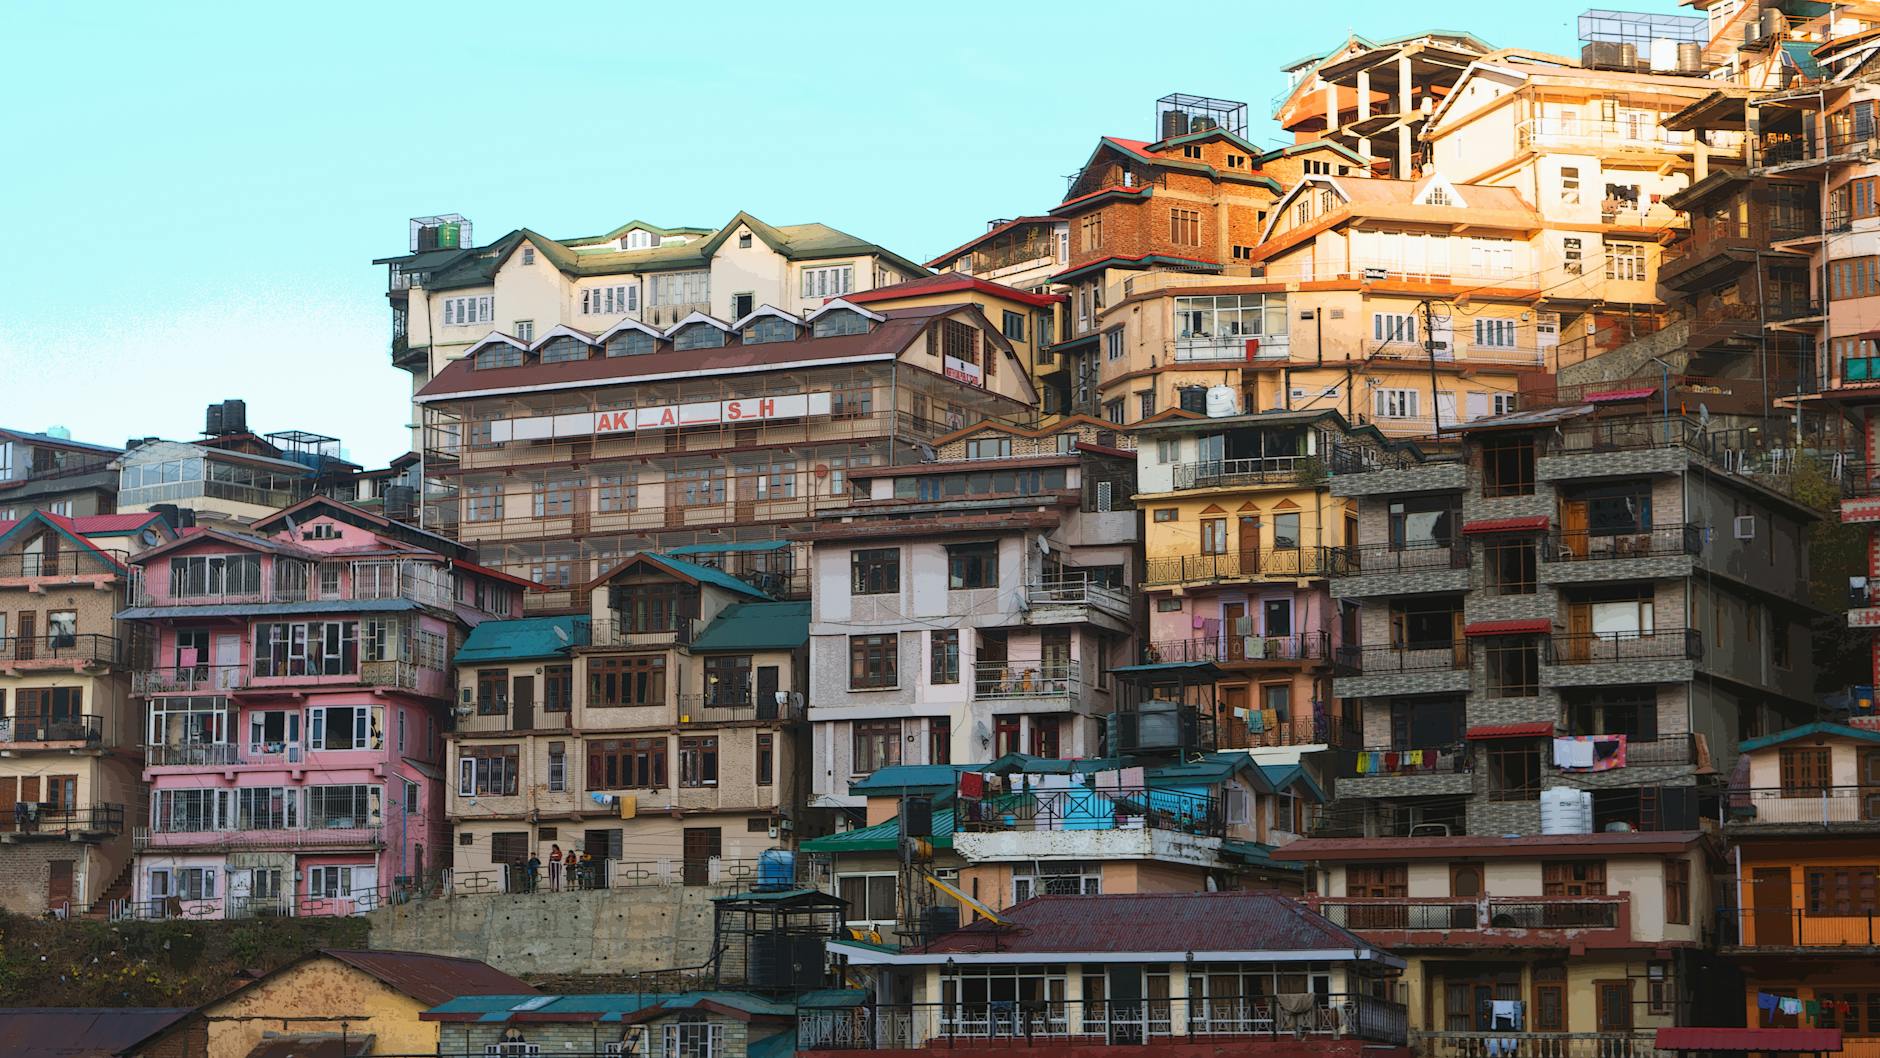 buildings and houses in the city of shimla